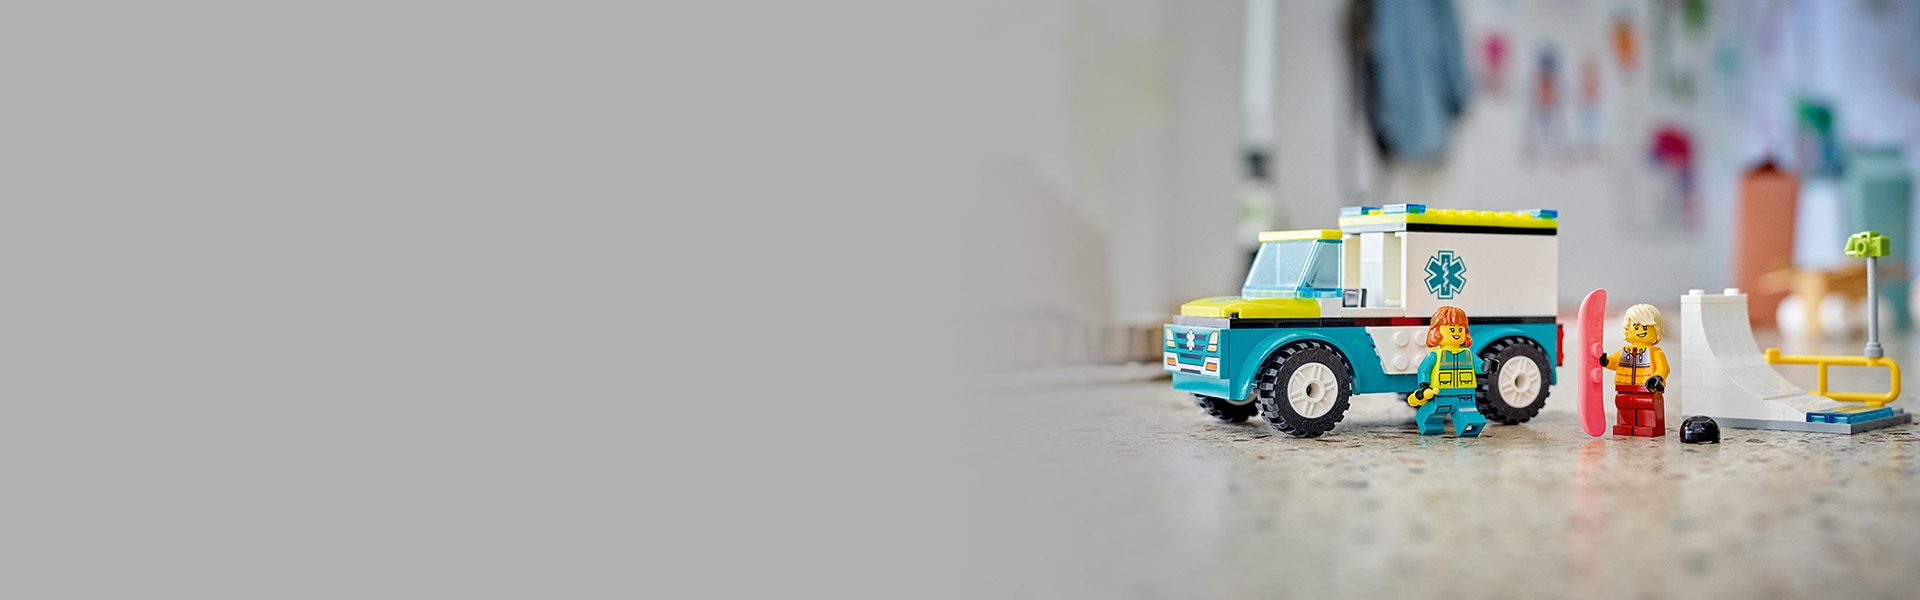 Emergency Ambulance and Snowboarder 60403 | City | Buy online at 